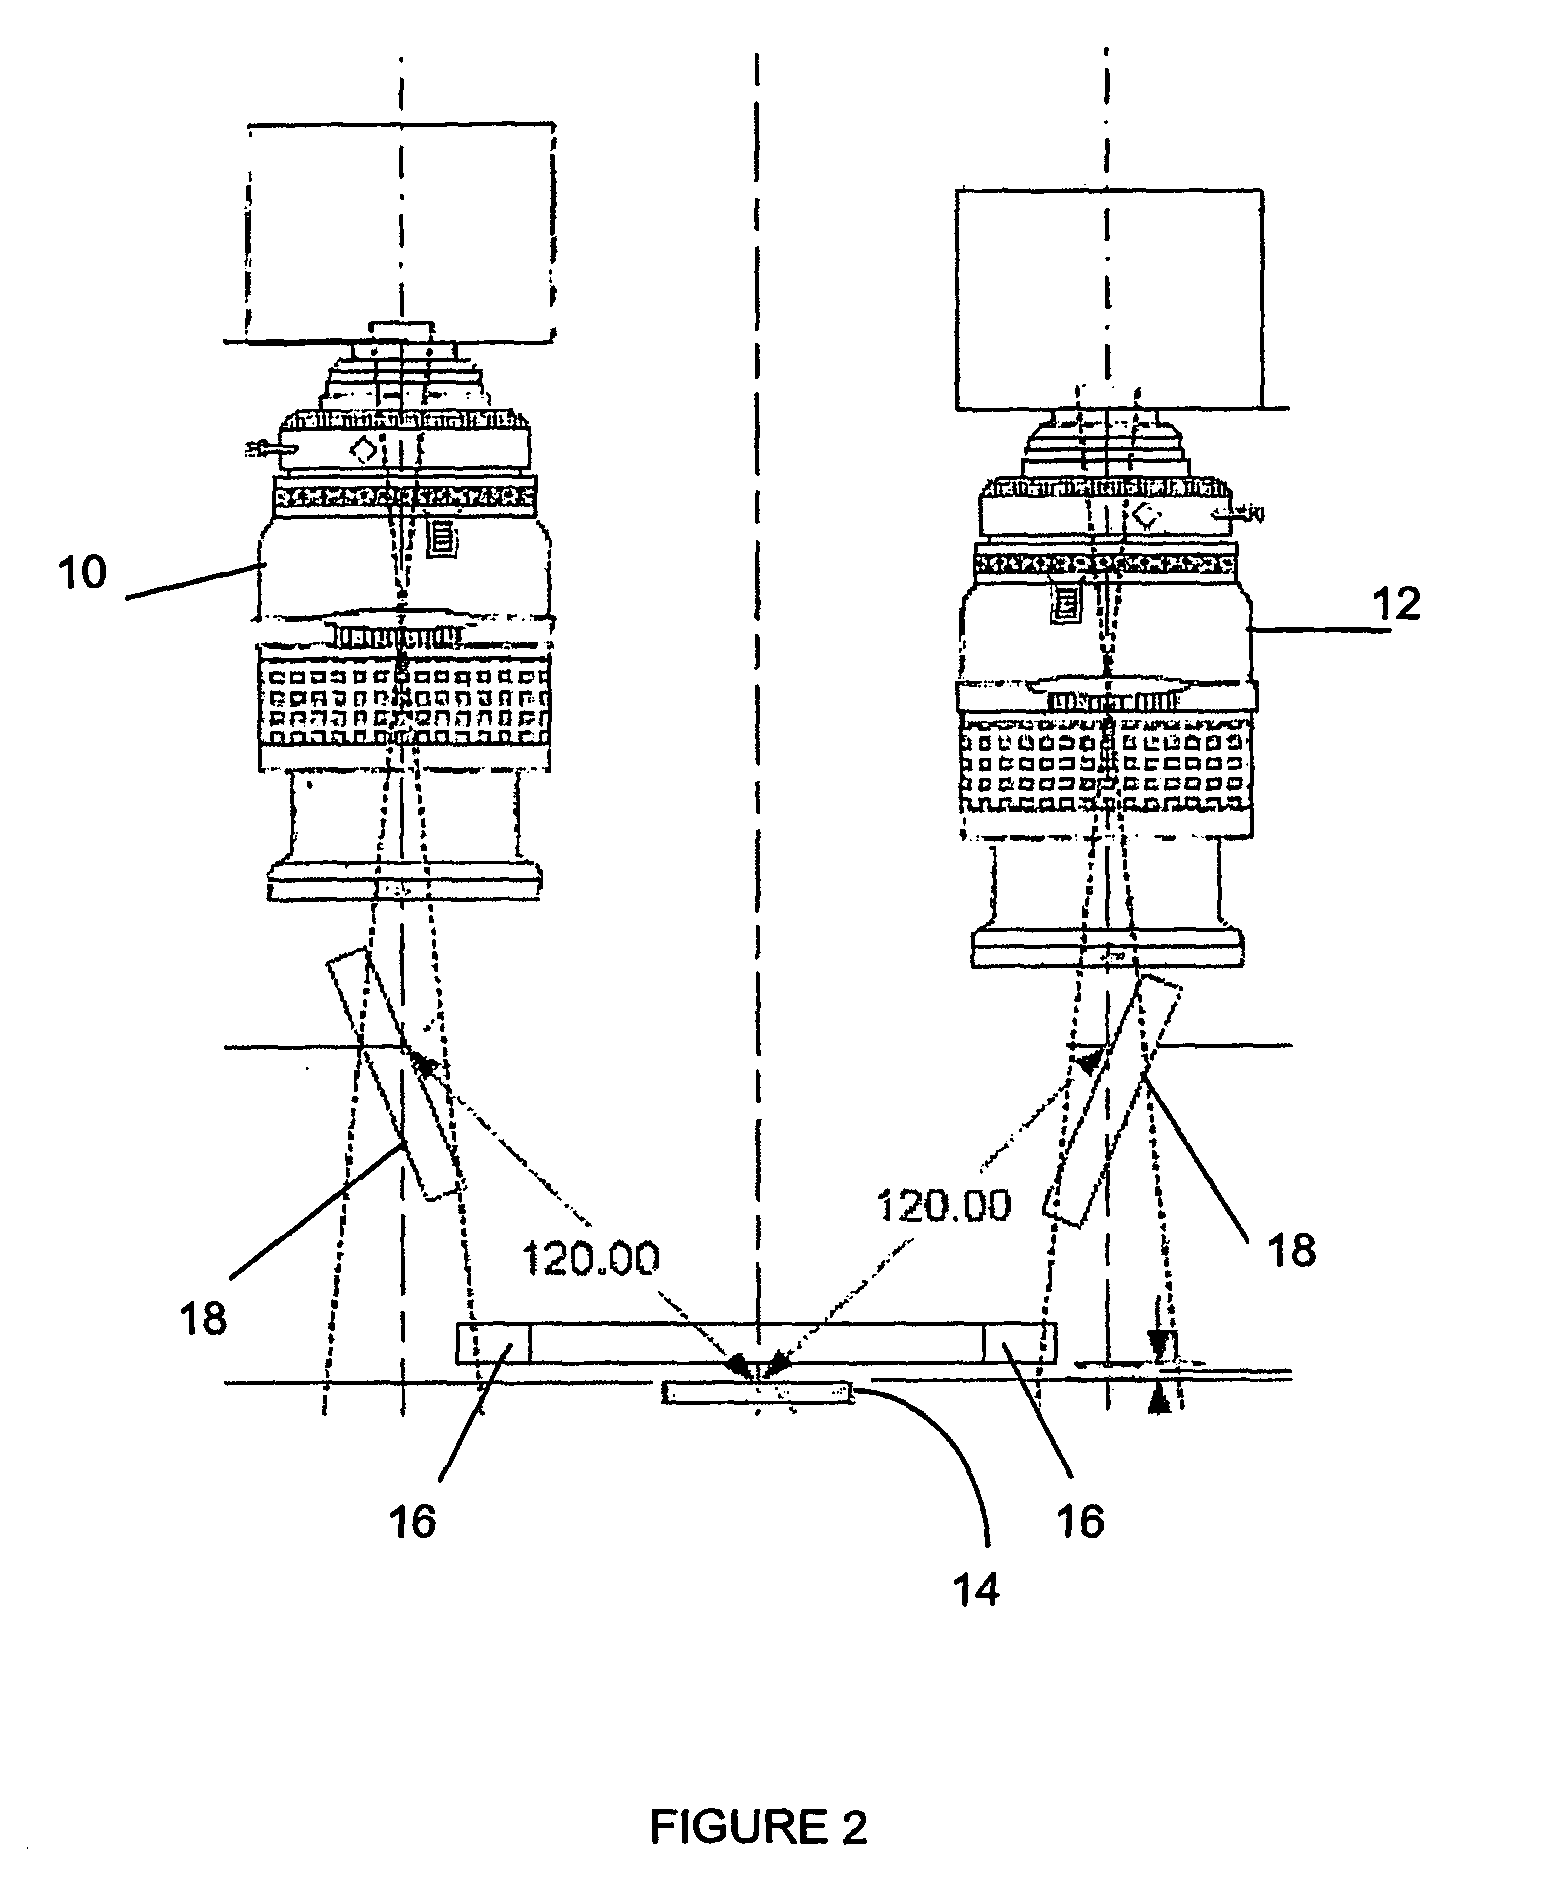 Method and apparatus for 3-dimensional vision and inspection of ball and like protrusions of electronic components